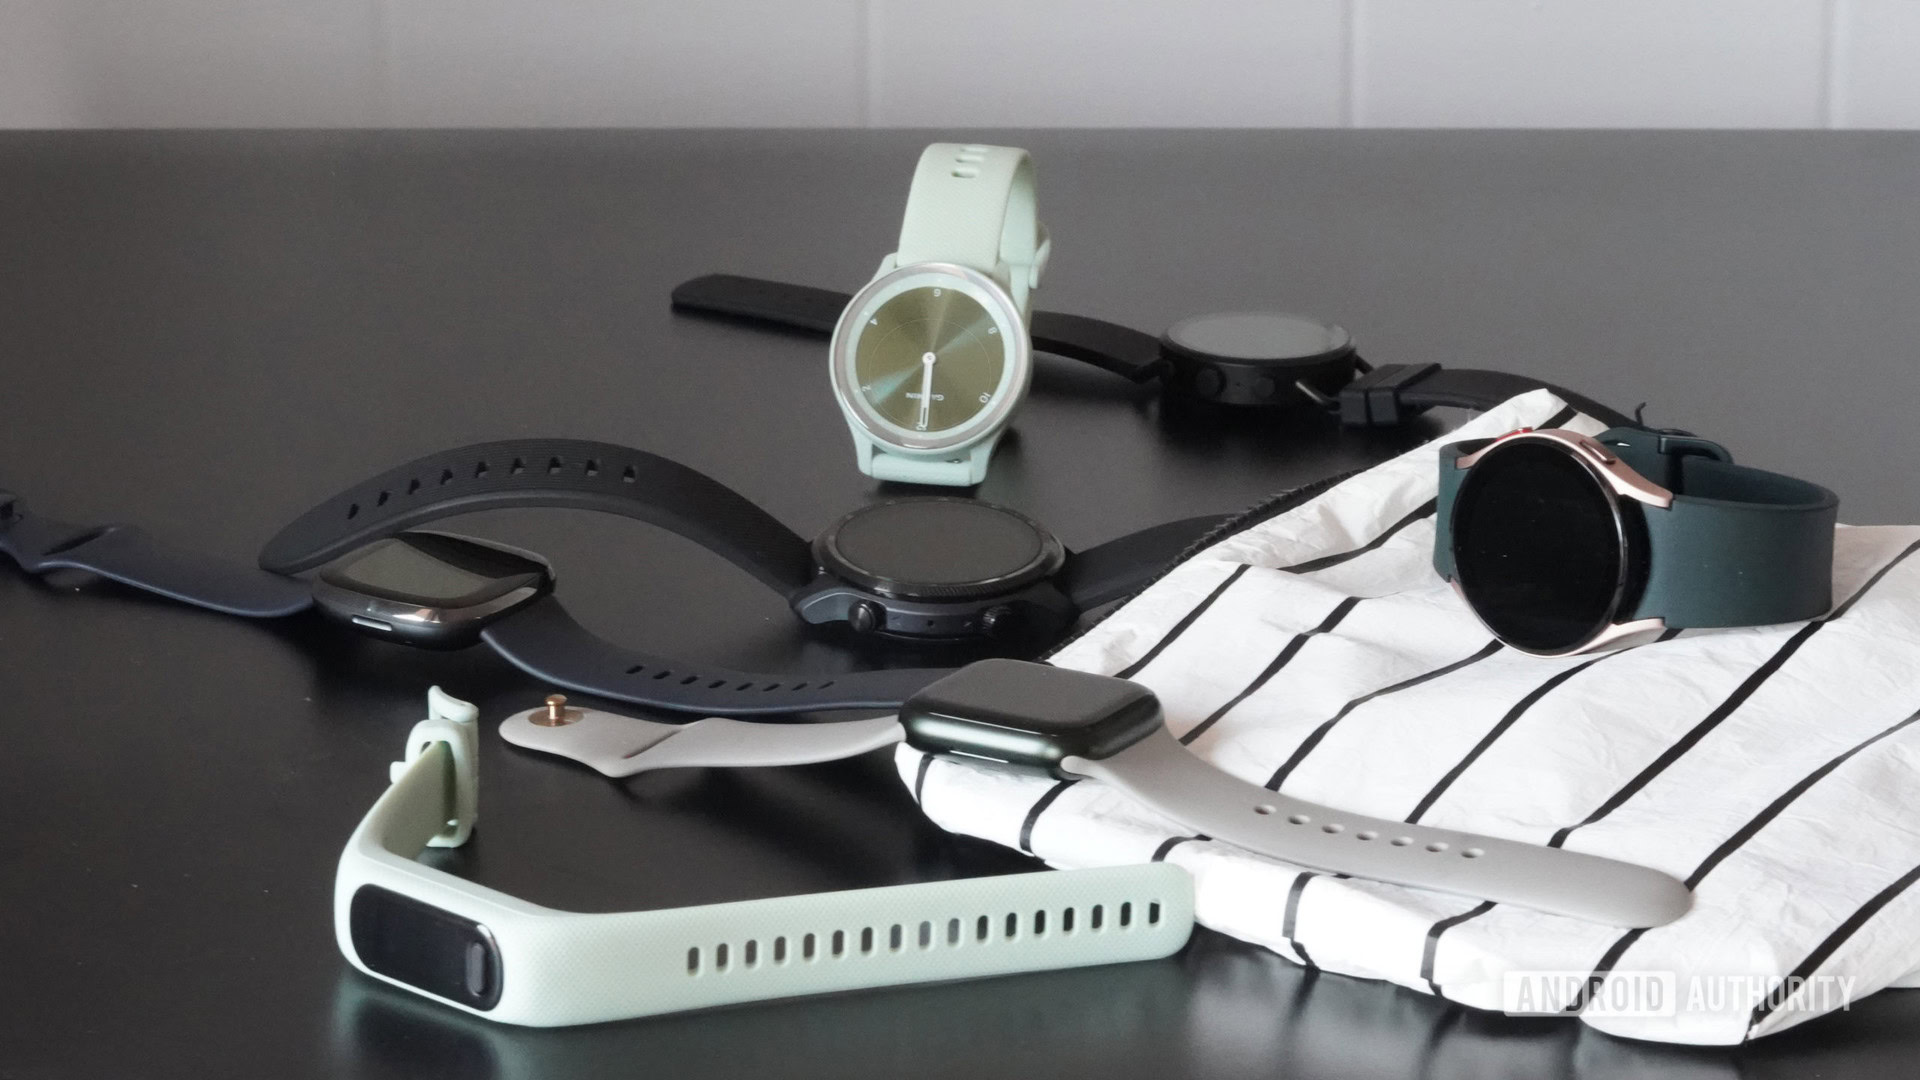 A variety of wearables from the current market represent some of the current options available for women.